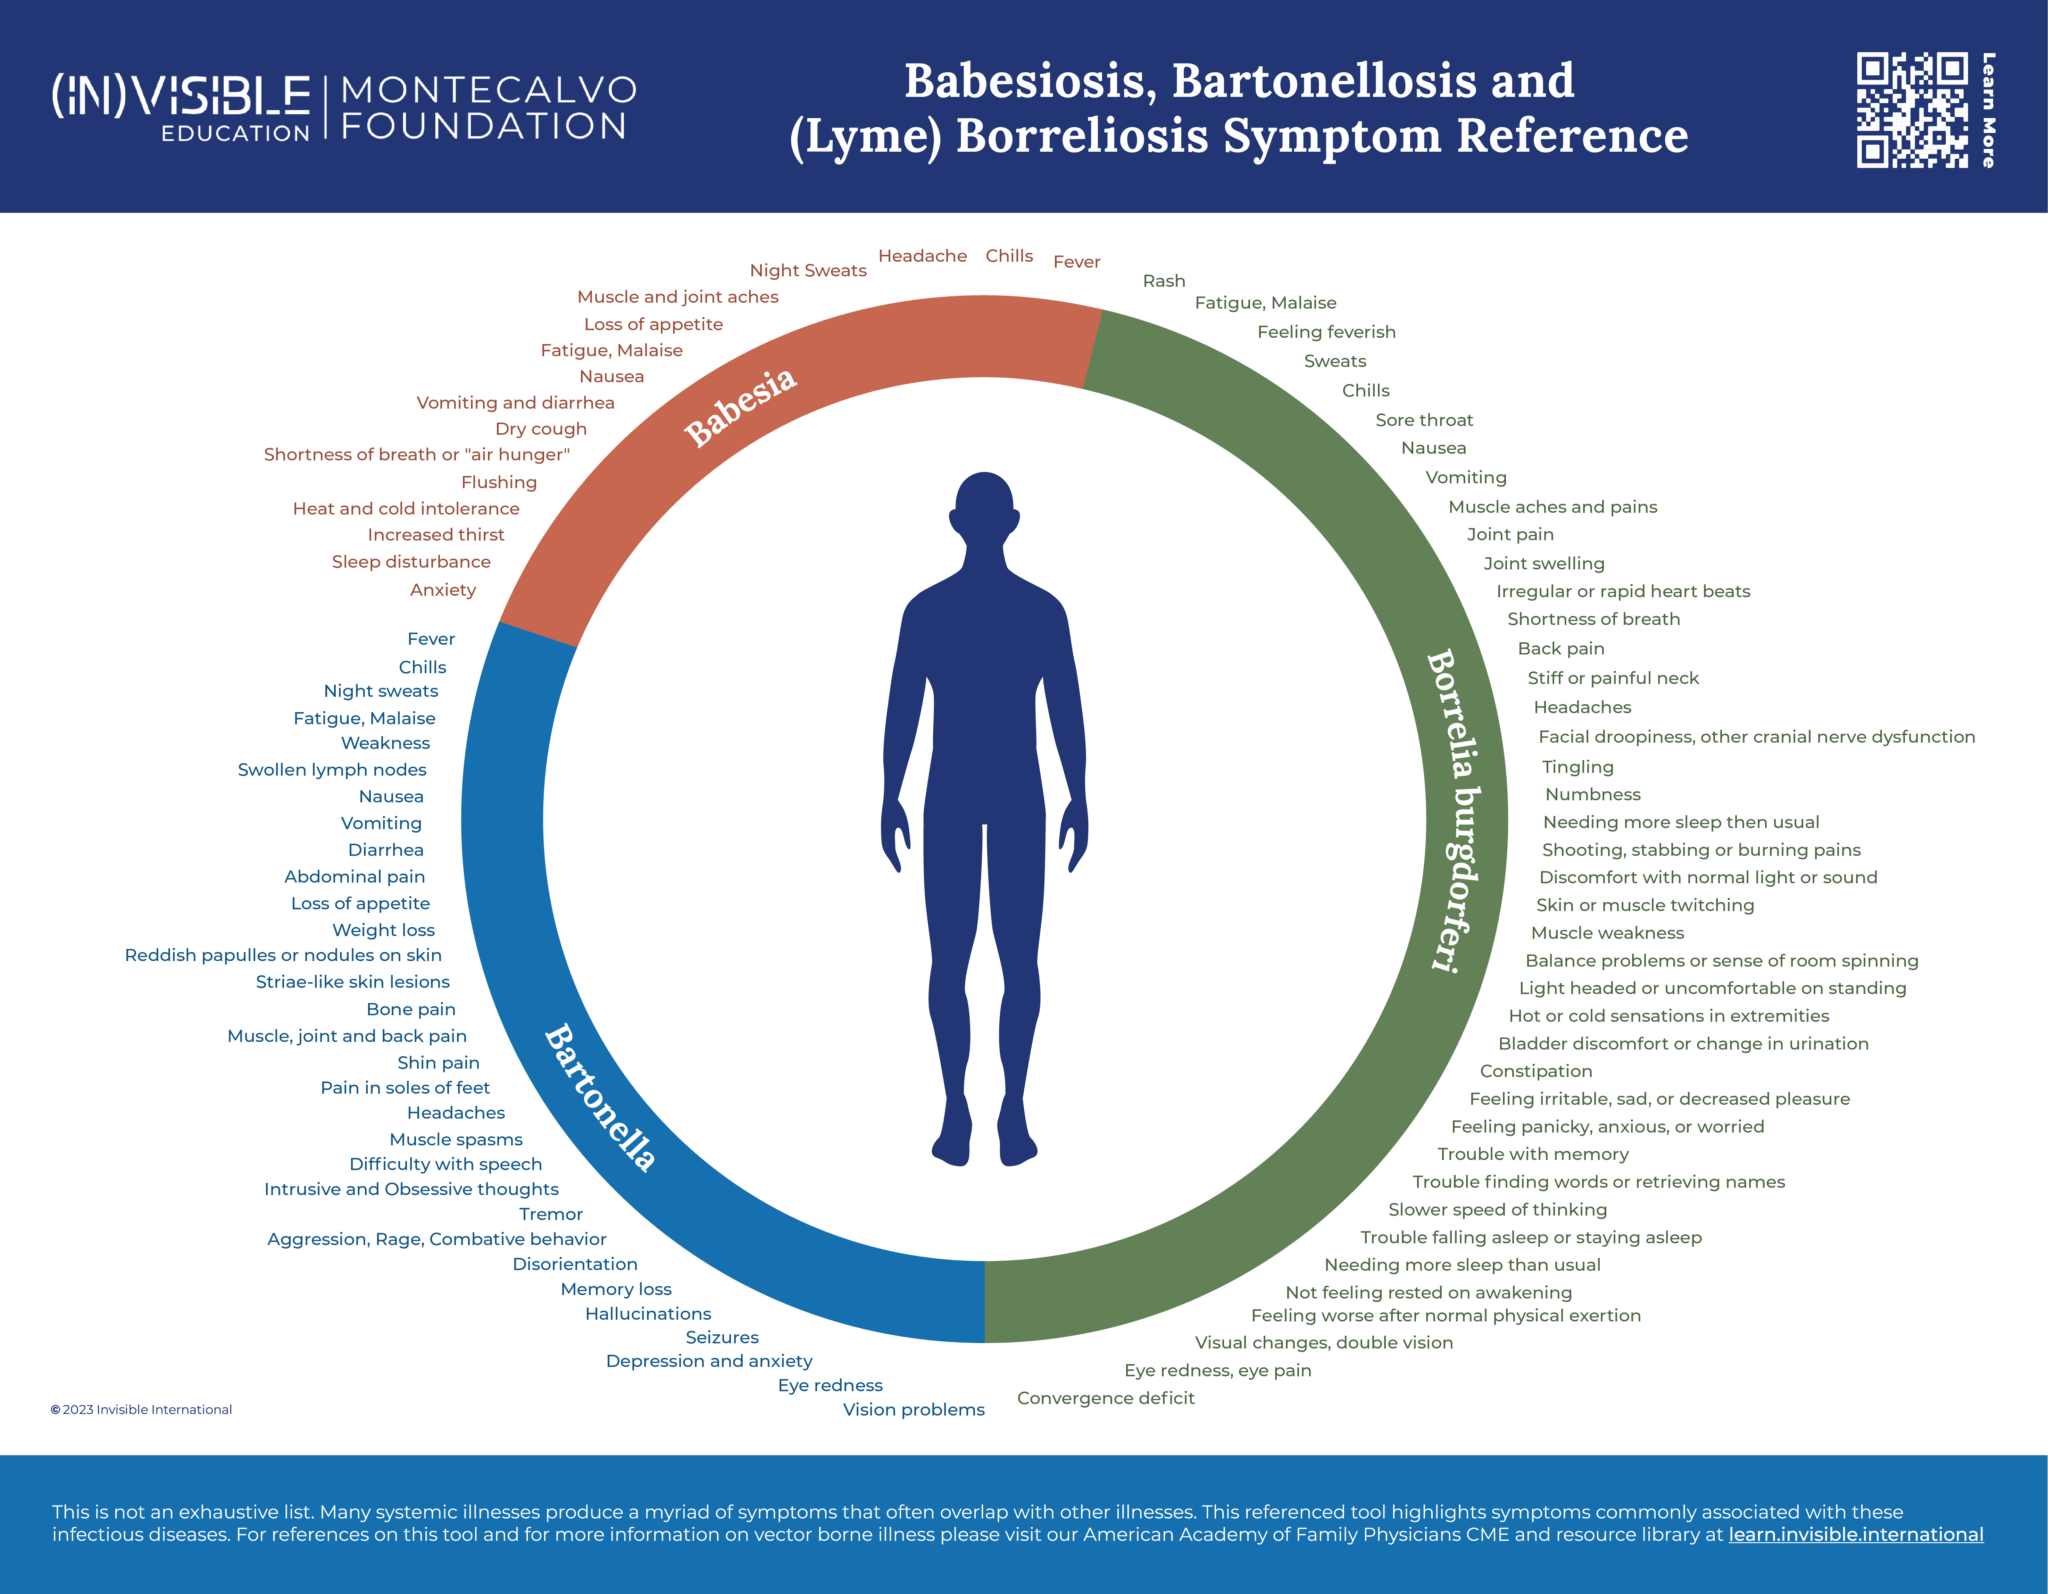 Babesiosis-Bartonellosis-and-Lyme-Borreliosis-Symptom-Reference-Updated-06.07.23-2048x1594.png